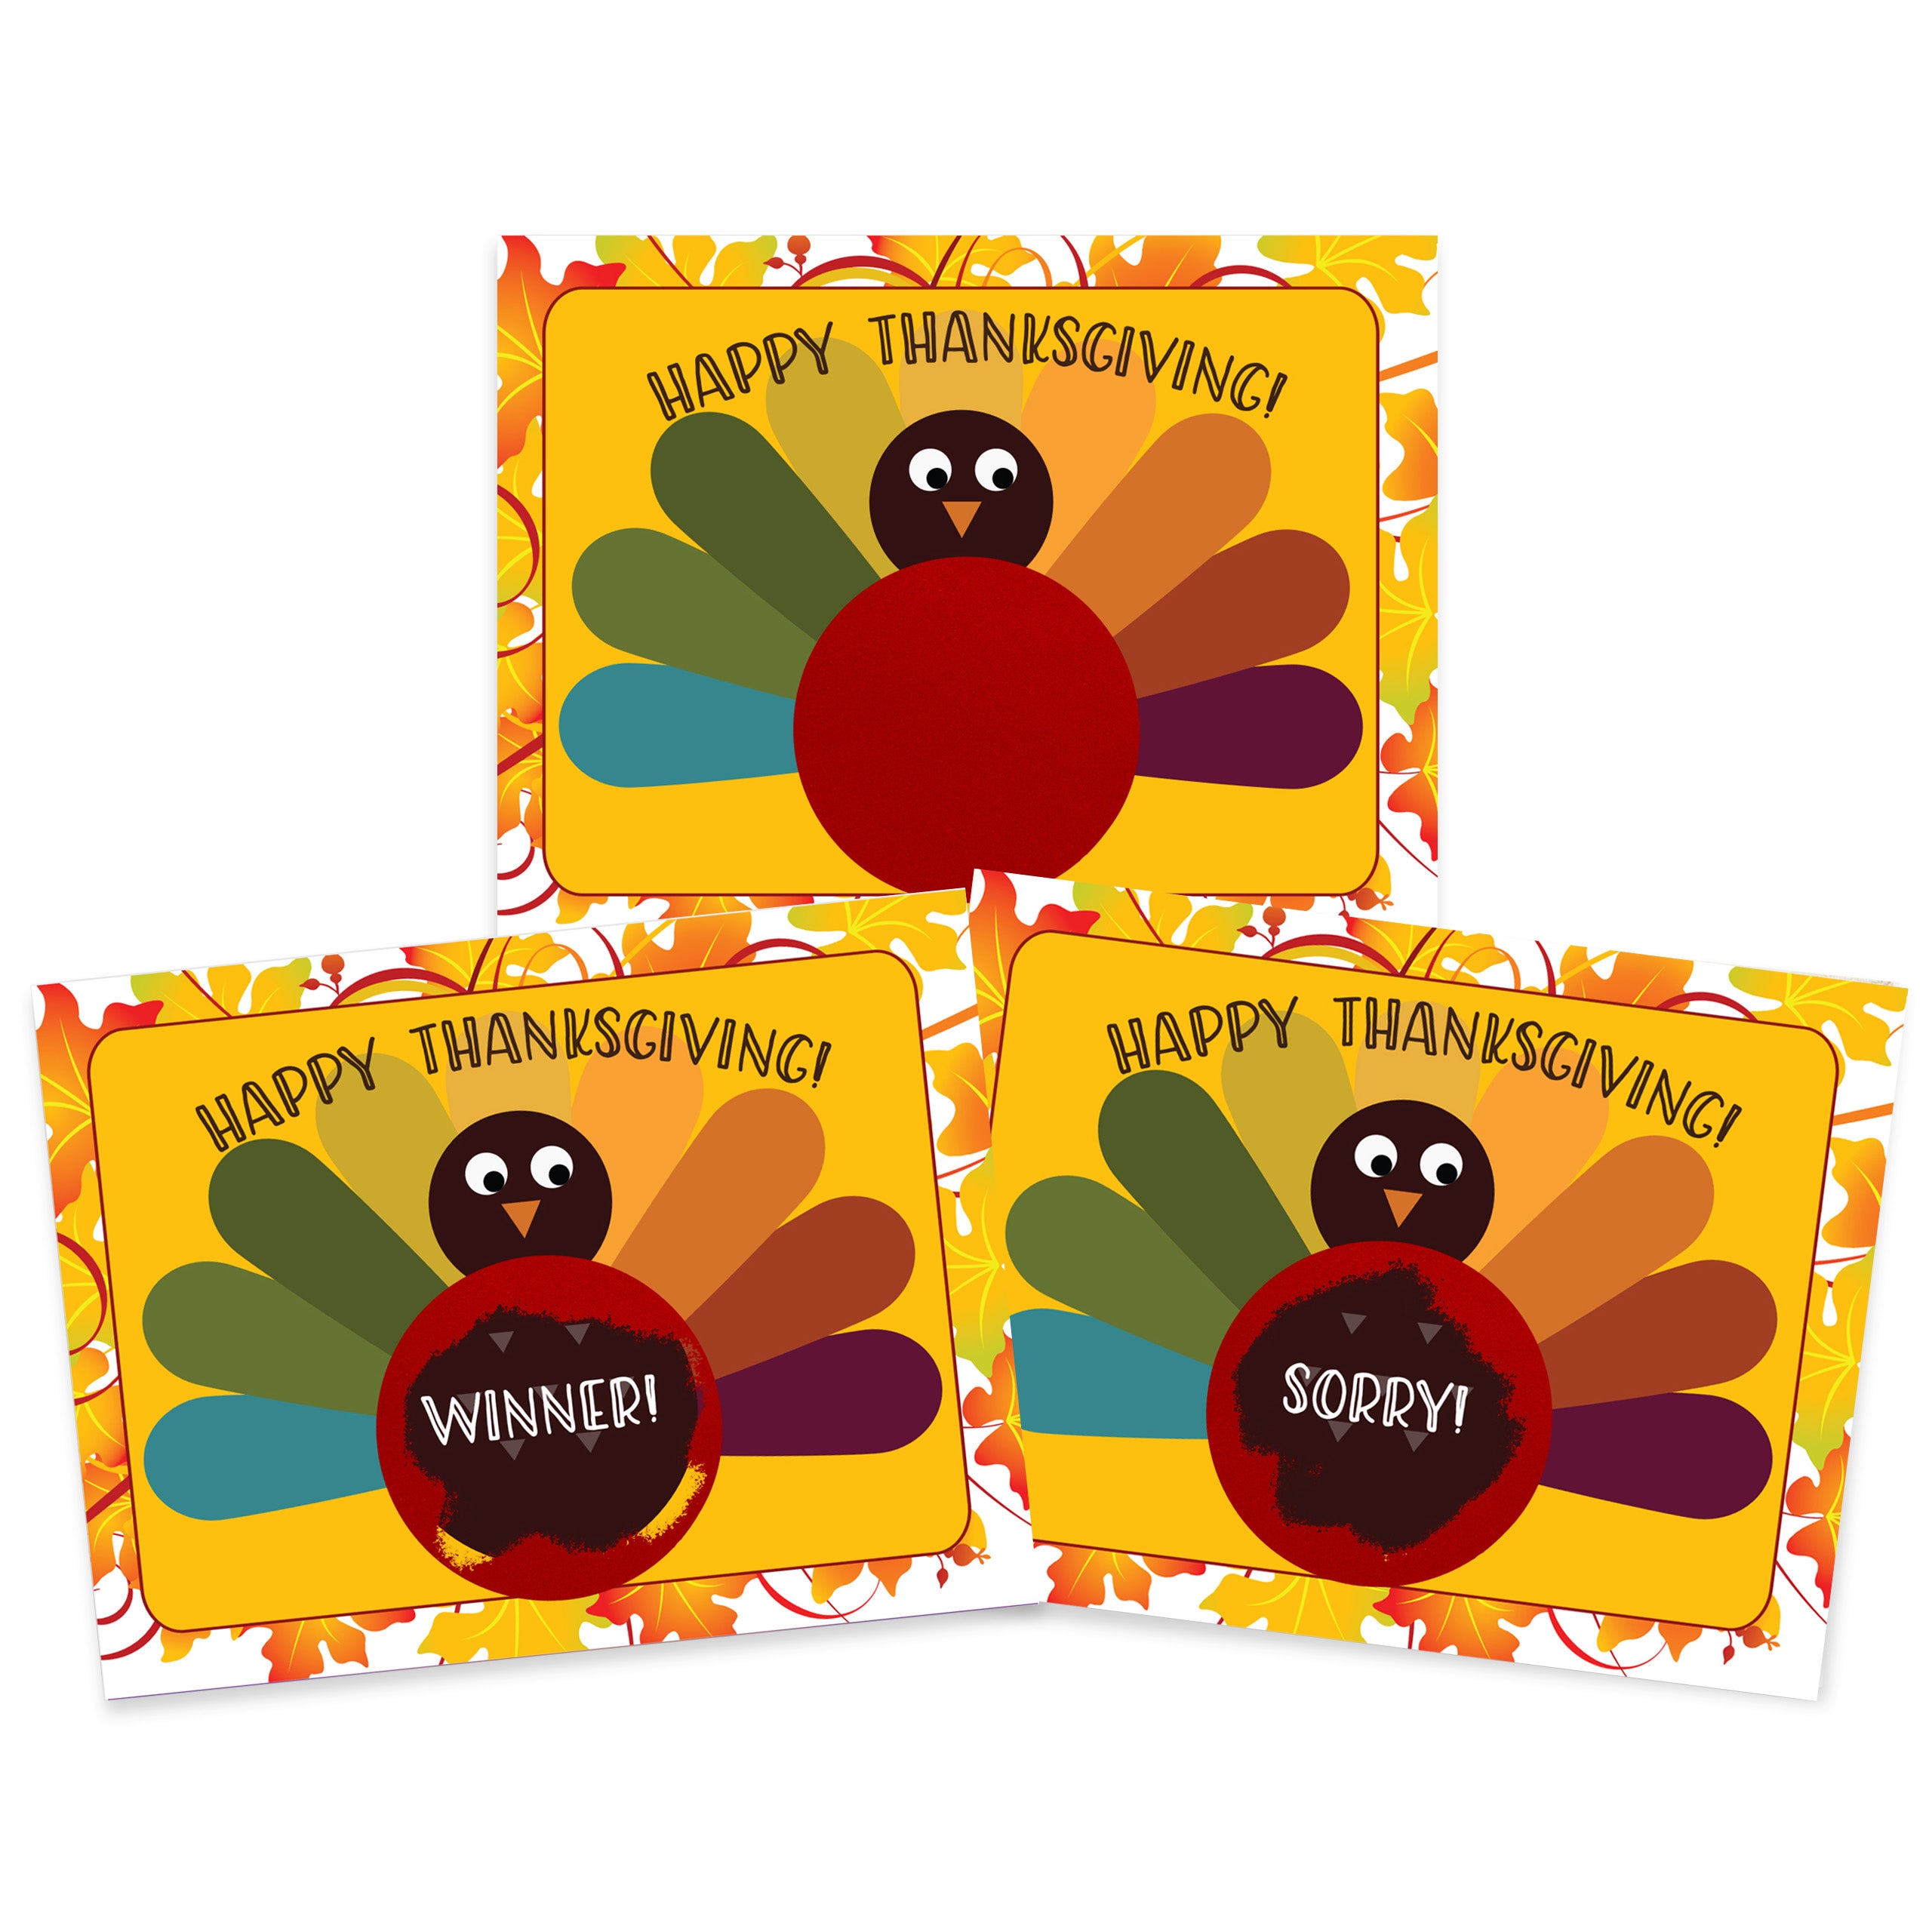 Thanksgiving Turkey Scratch Off Game 26 Pack - 2 Winning and 24 Non-Winning Cards